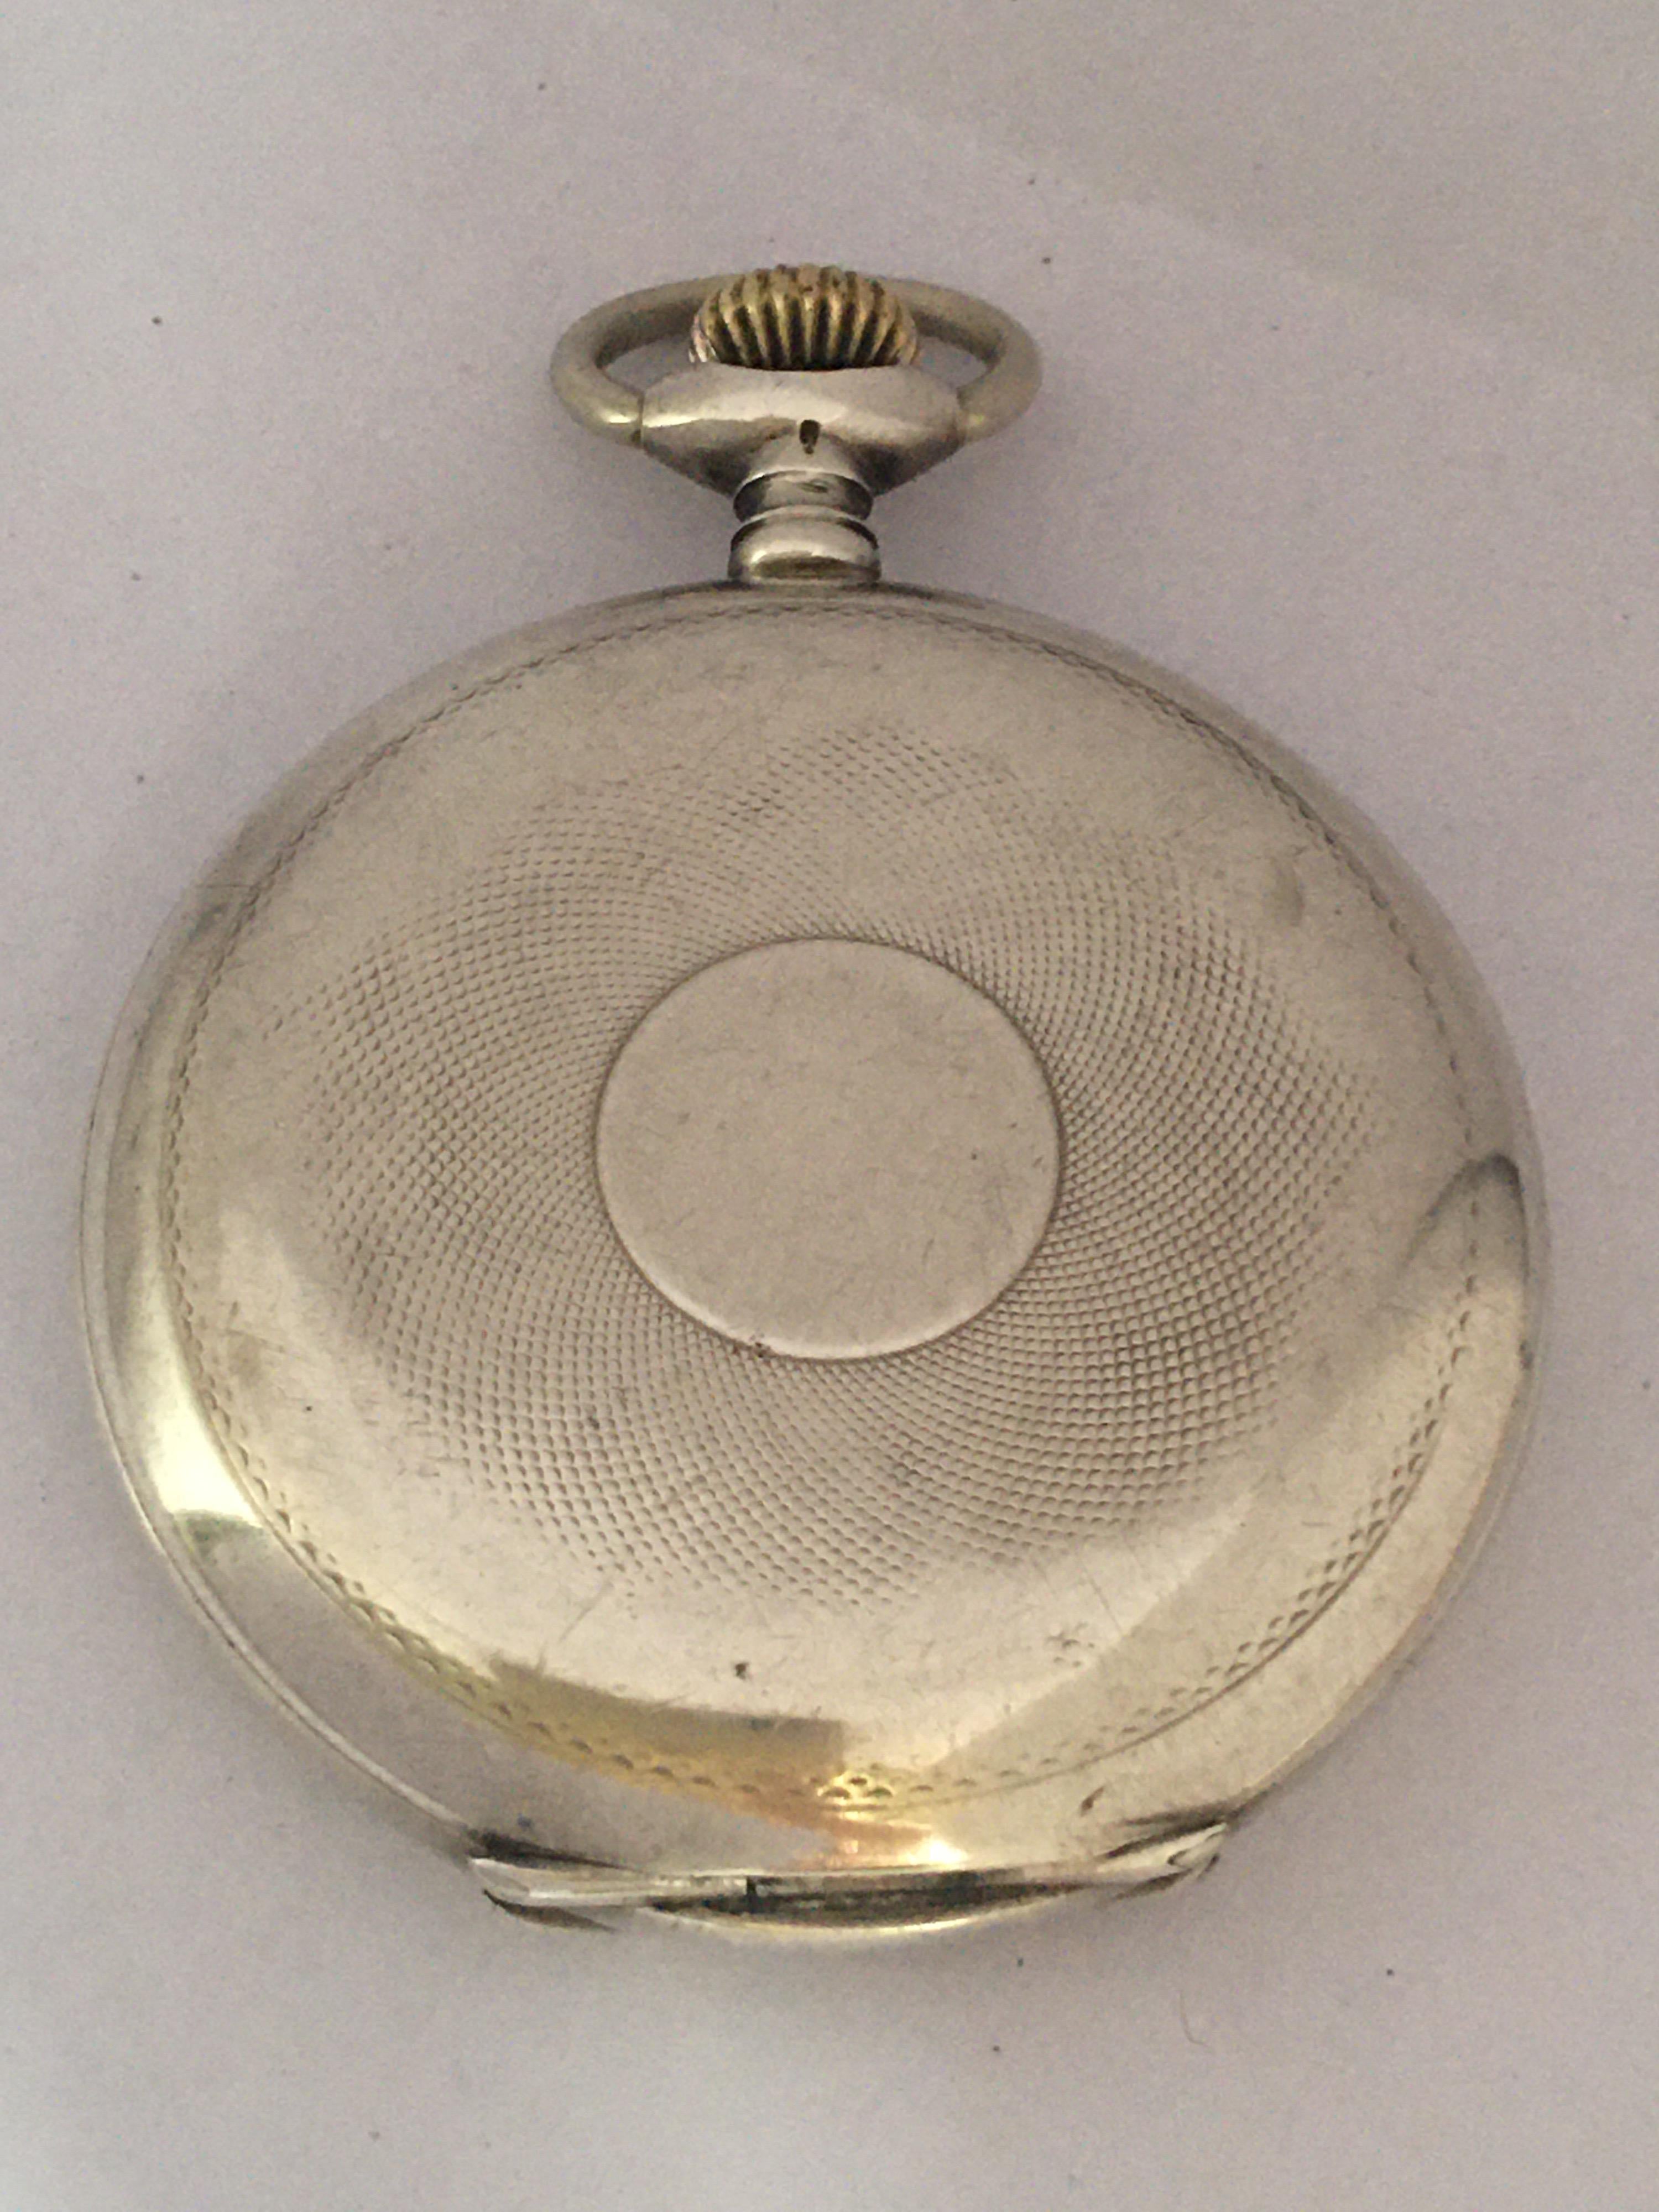 Silver (0.875) lever hunter pocket watch, the movement with balance cock inscribed 'PAT APP. FOR', compensated balance and regulator, the dial signed Marx & Co. with Arabic numerals, minute markers and subsidiary seconds, blued steel moon hands, the